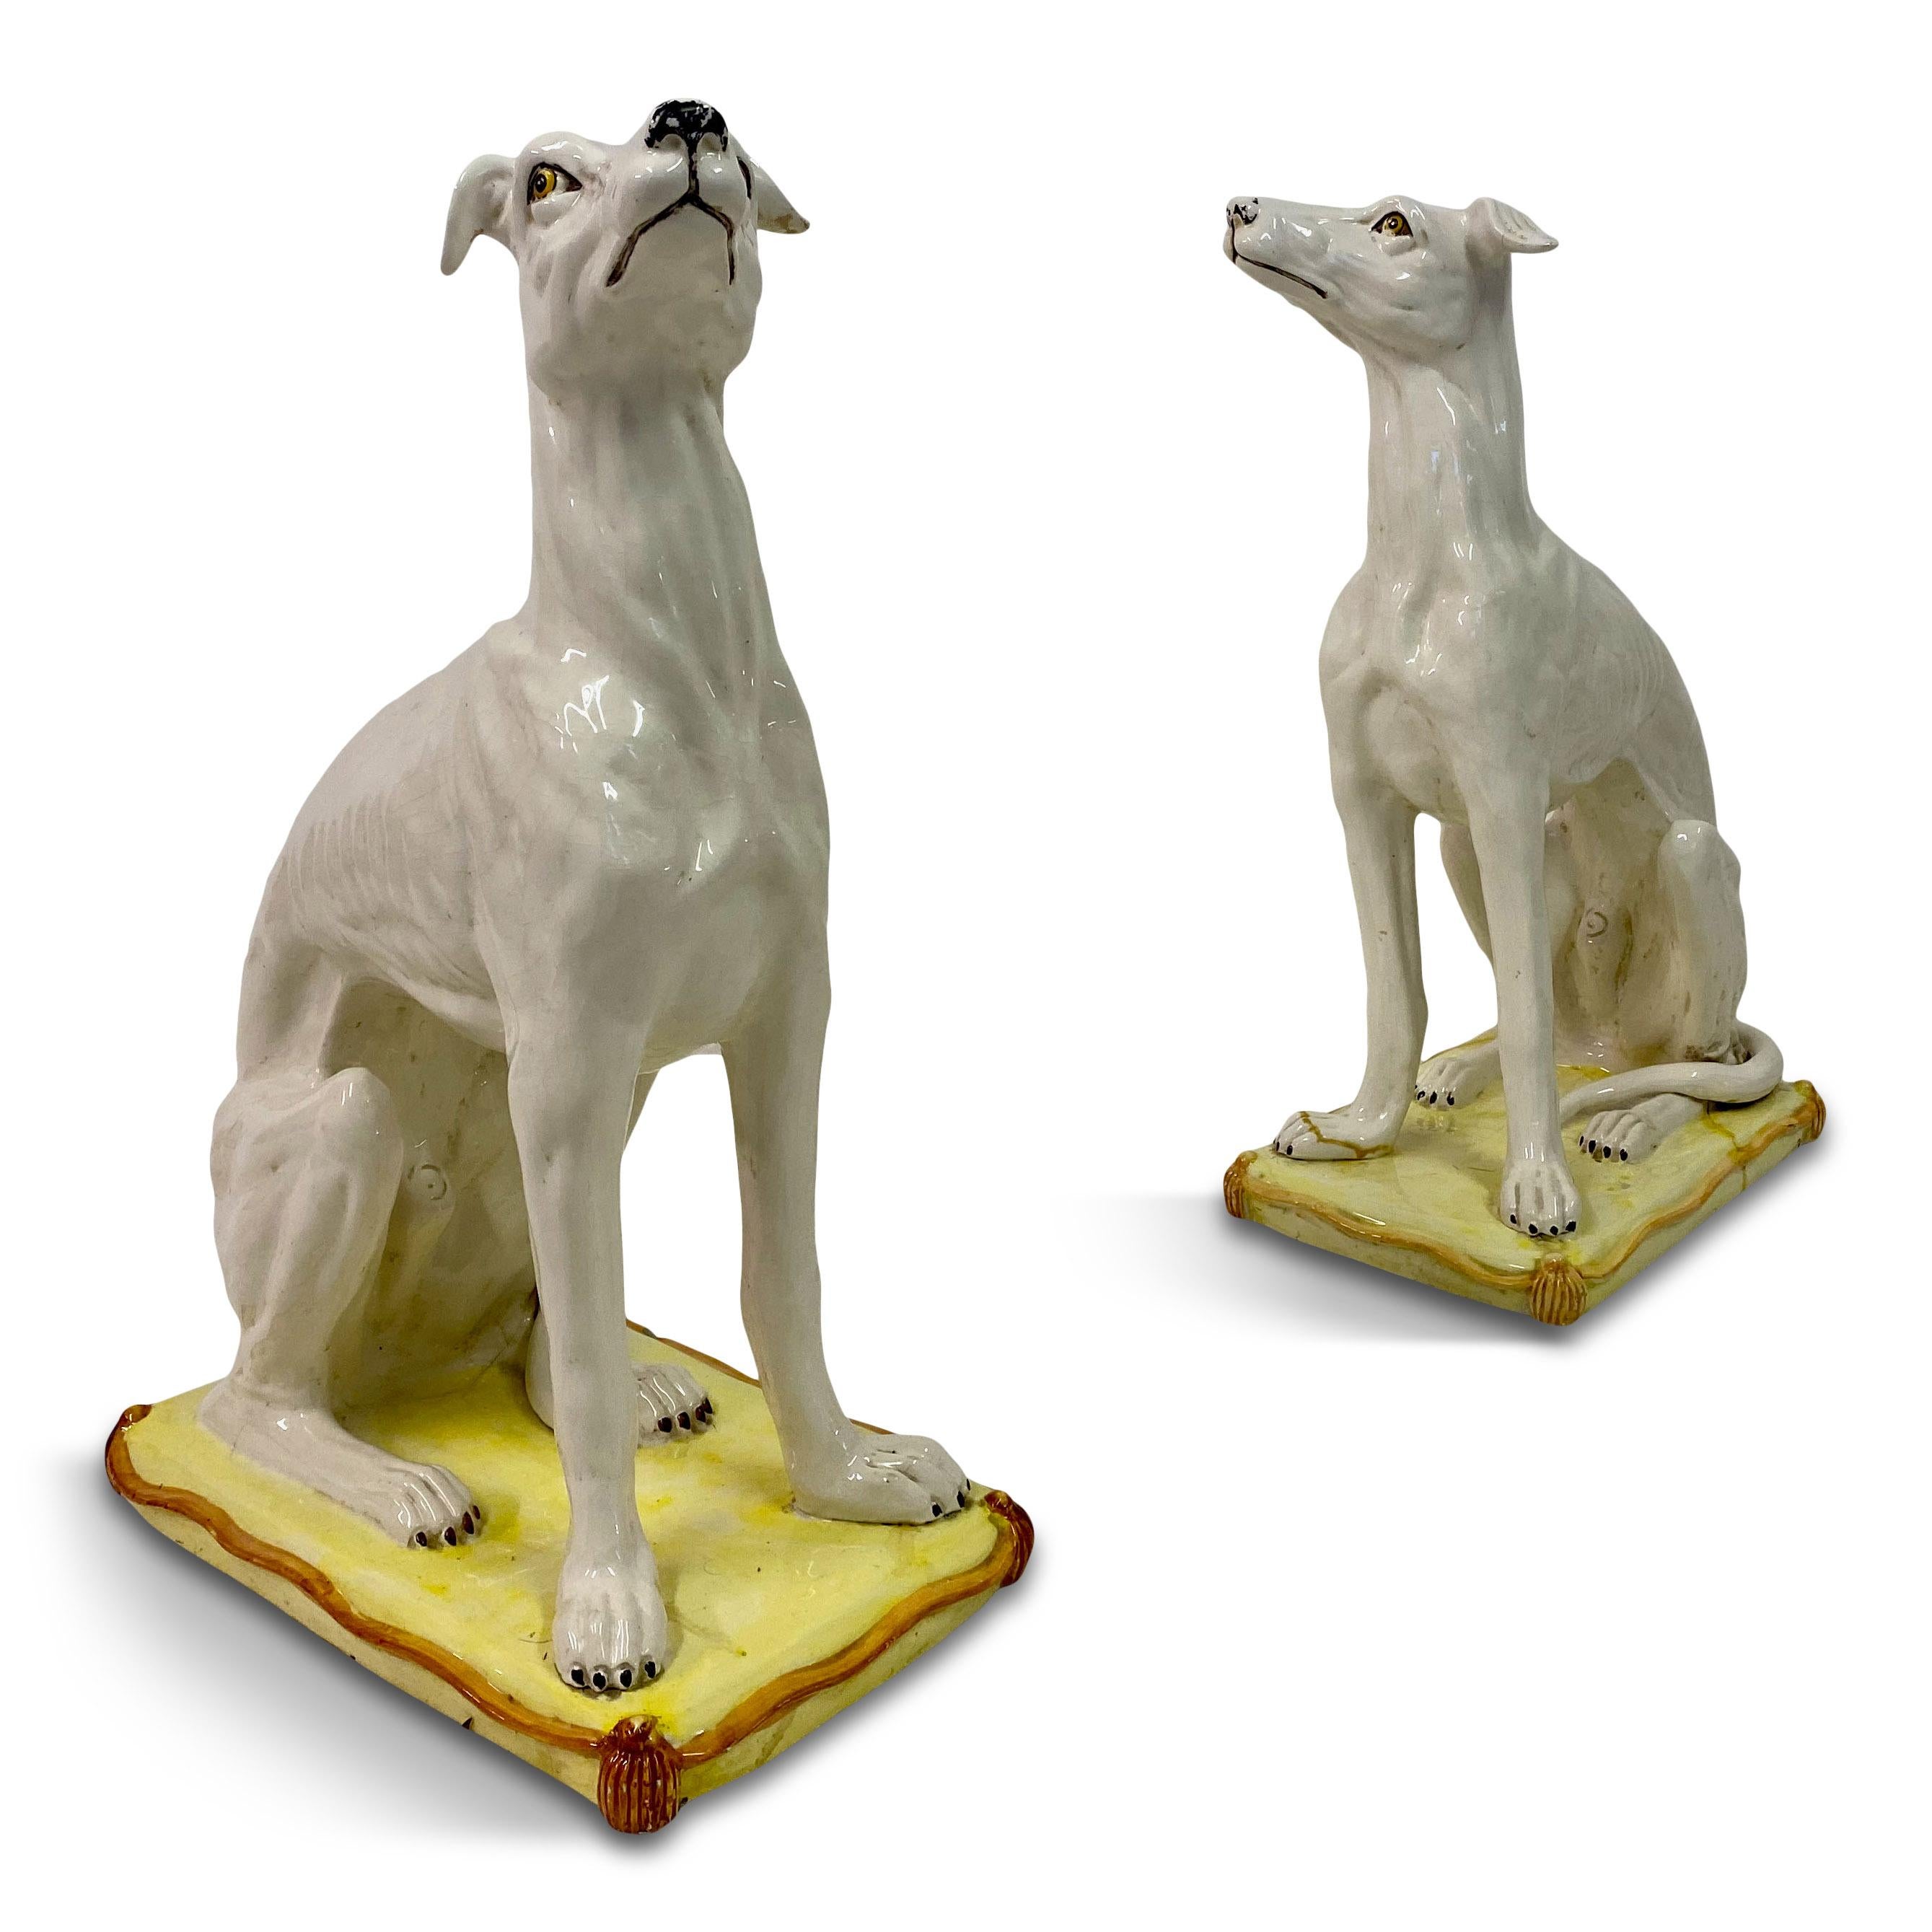 Pair of ceramic whippets

Each siting on a yellow cushion

Handpainted

Wear to the painting and some cracks to the glaze

1950s Italy.
 